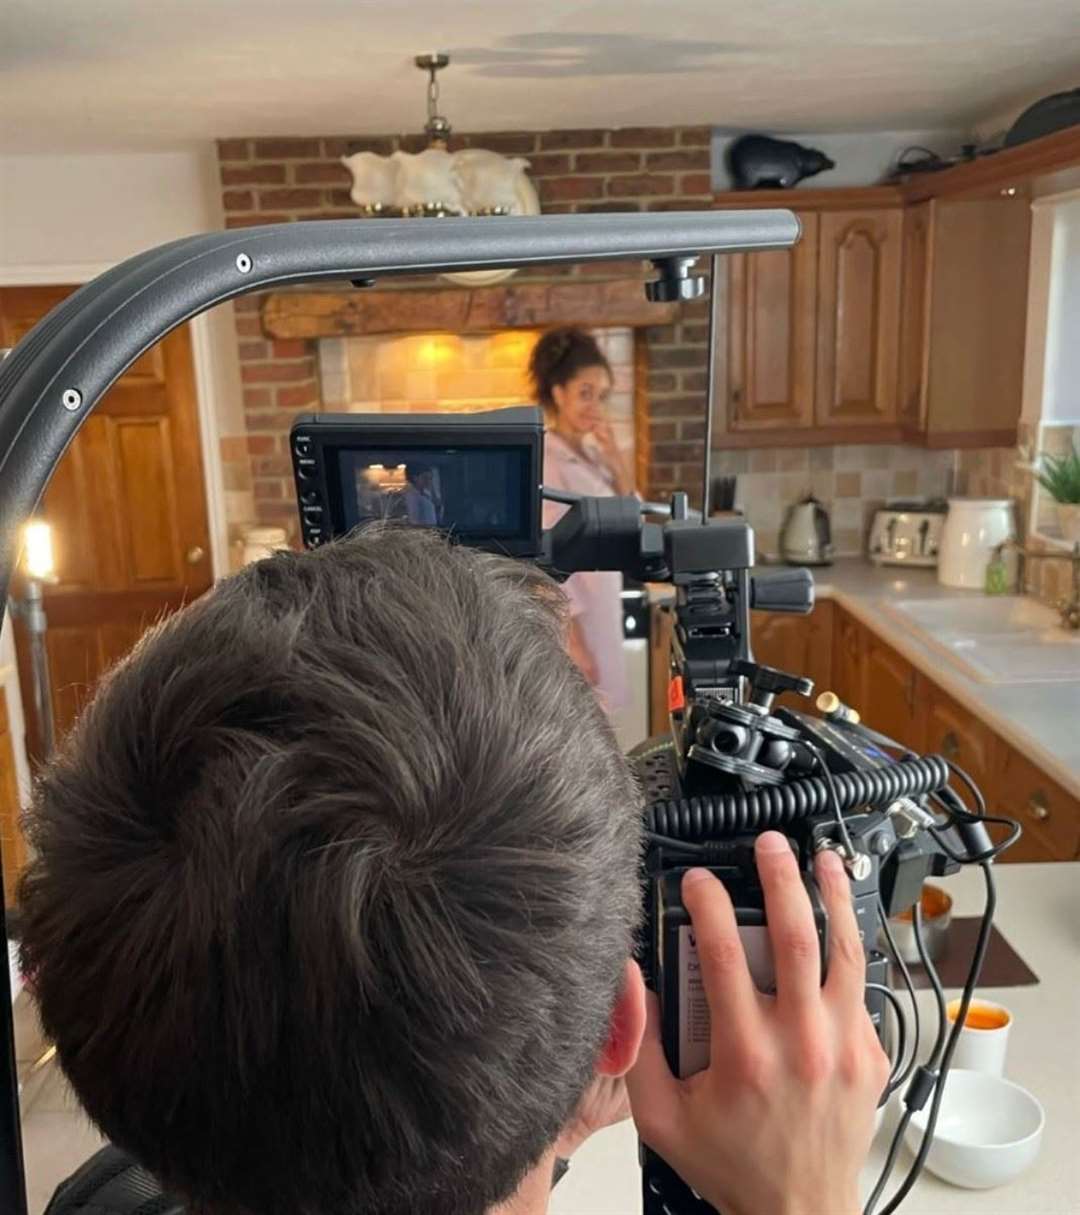 Some behind the scenes footage from 'Unstuck', a short film exploring domestic violence from a female perspective. Photo: Redeeming Features/ GTown Talents